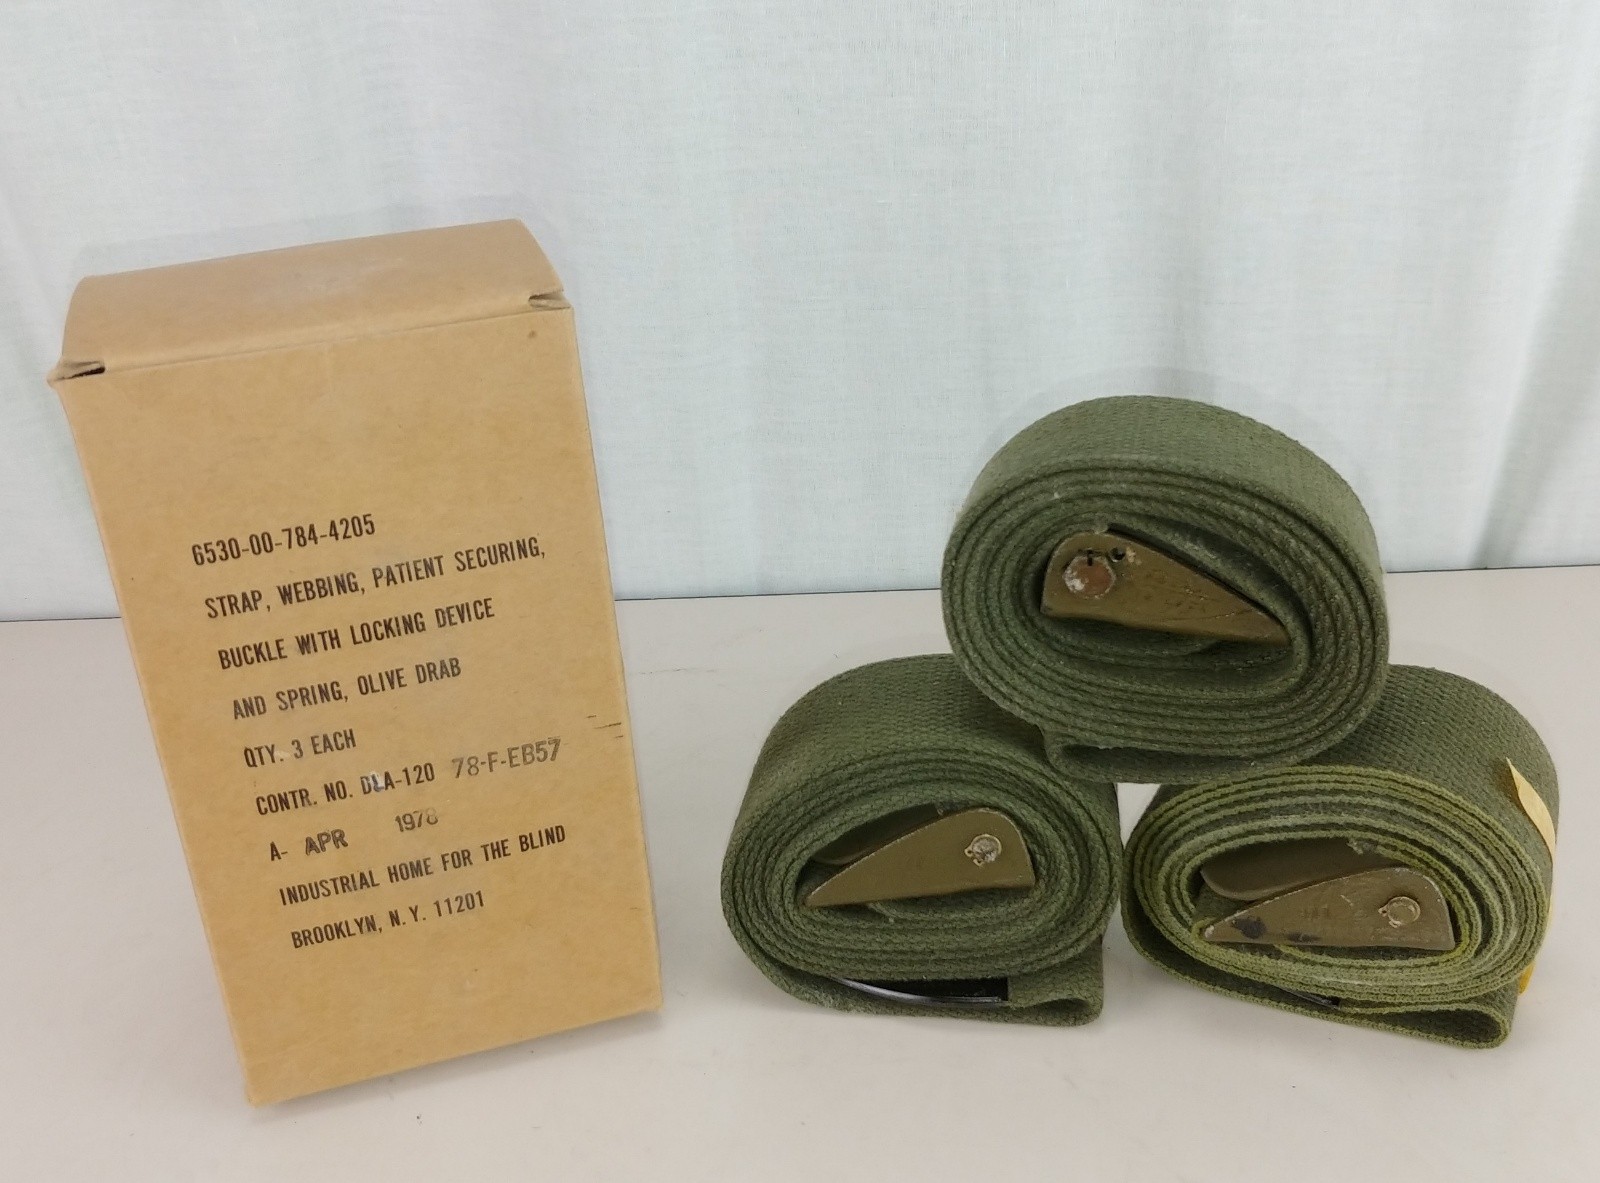 NOS Box of 3 Military 2" x 72" OD Green Cotton Webbing Strap Litter Restraint With Buckle